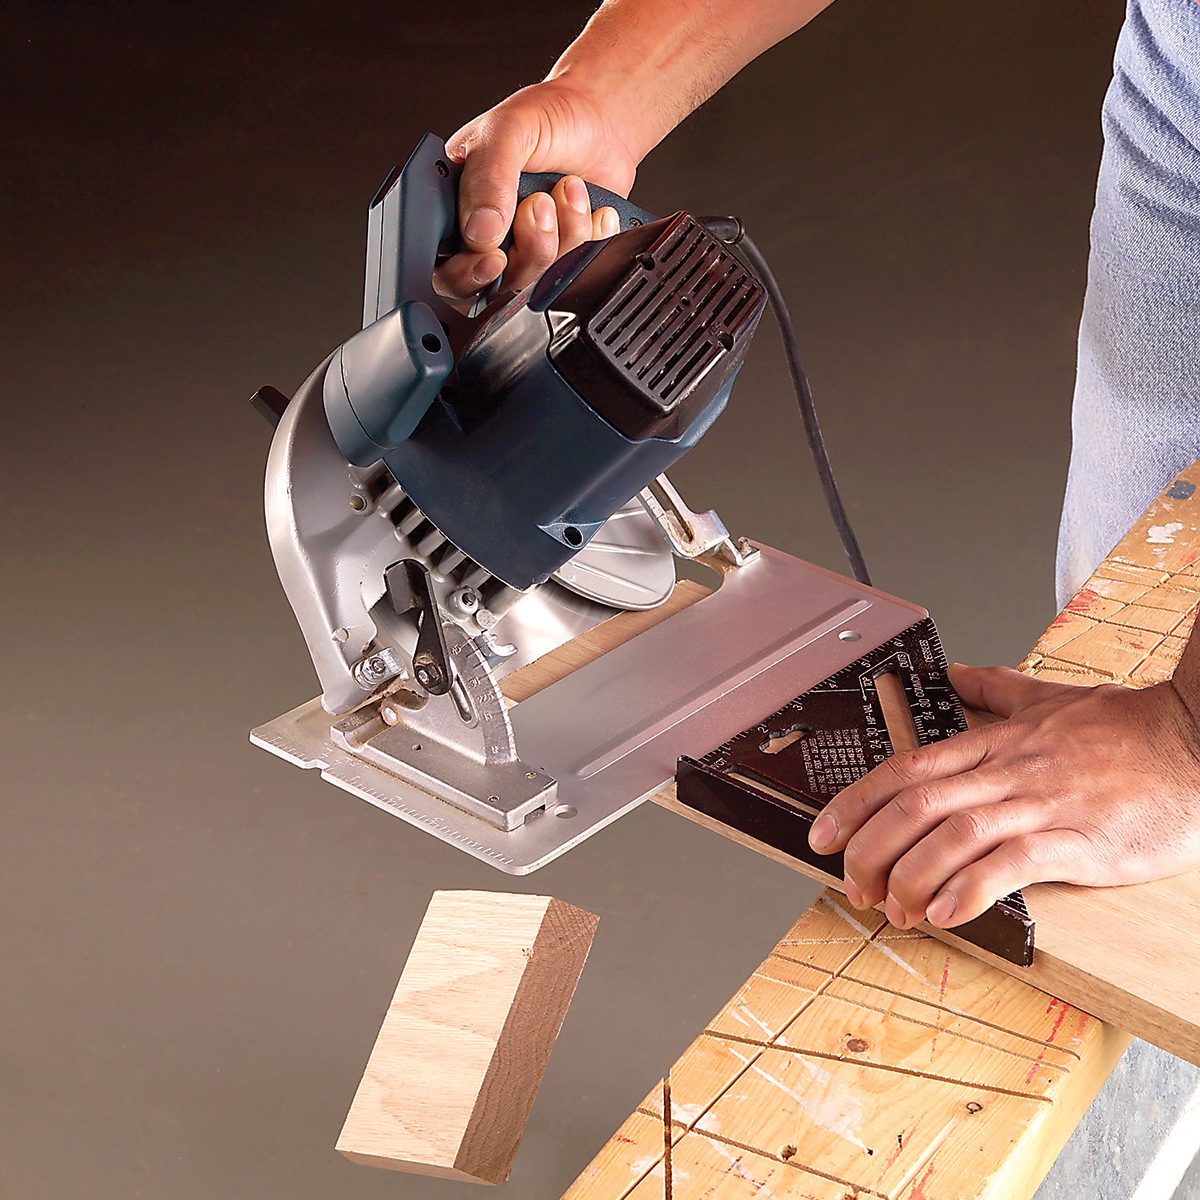 How To Make Angle Cuts With A Circular Saw Fh05jun 459 07 009